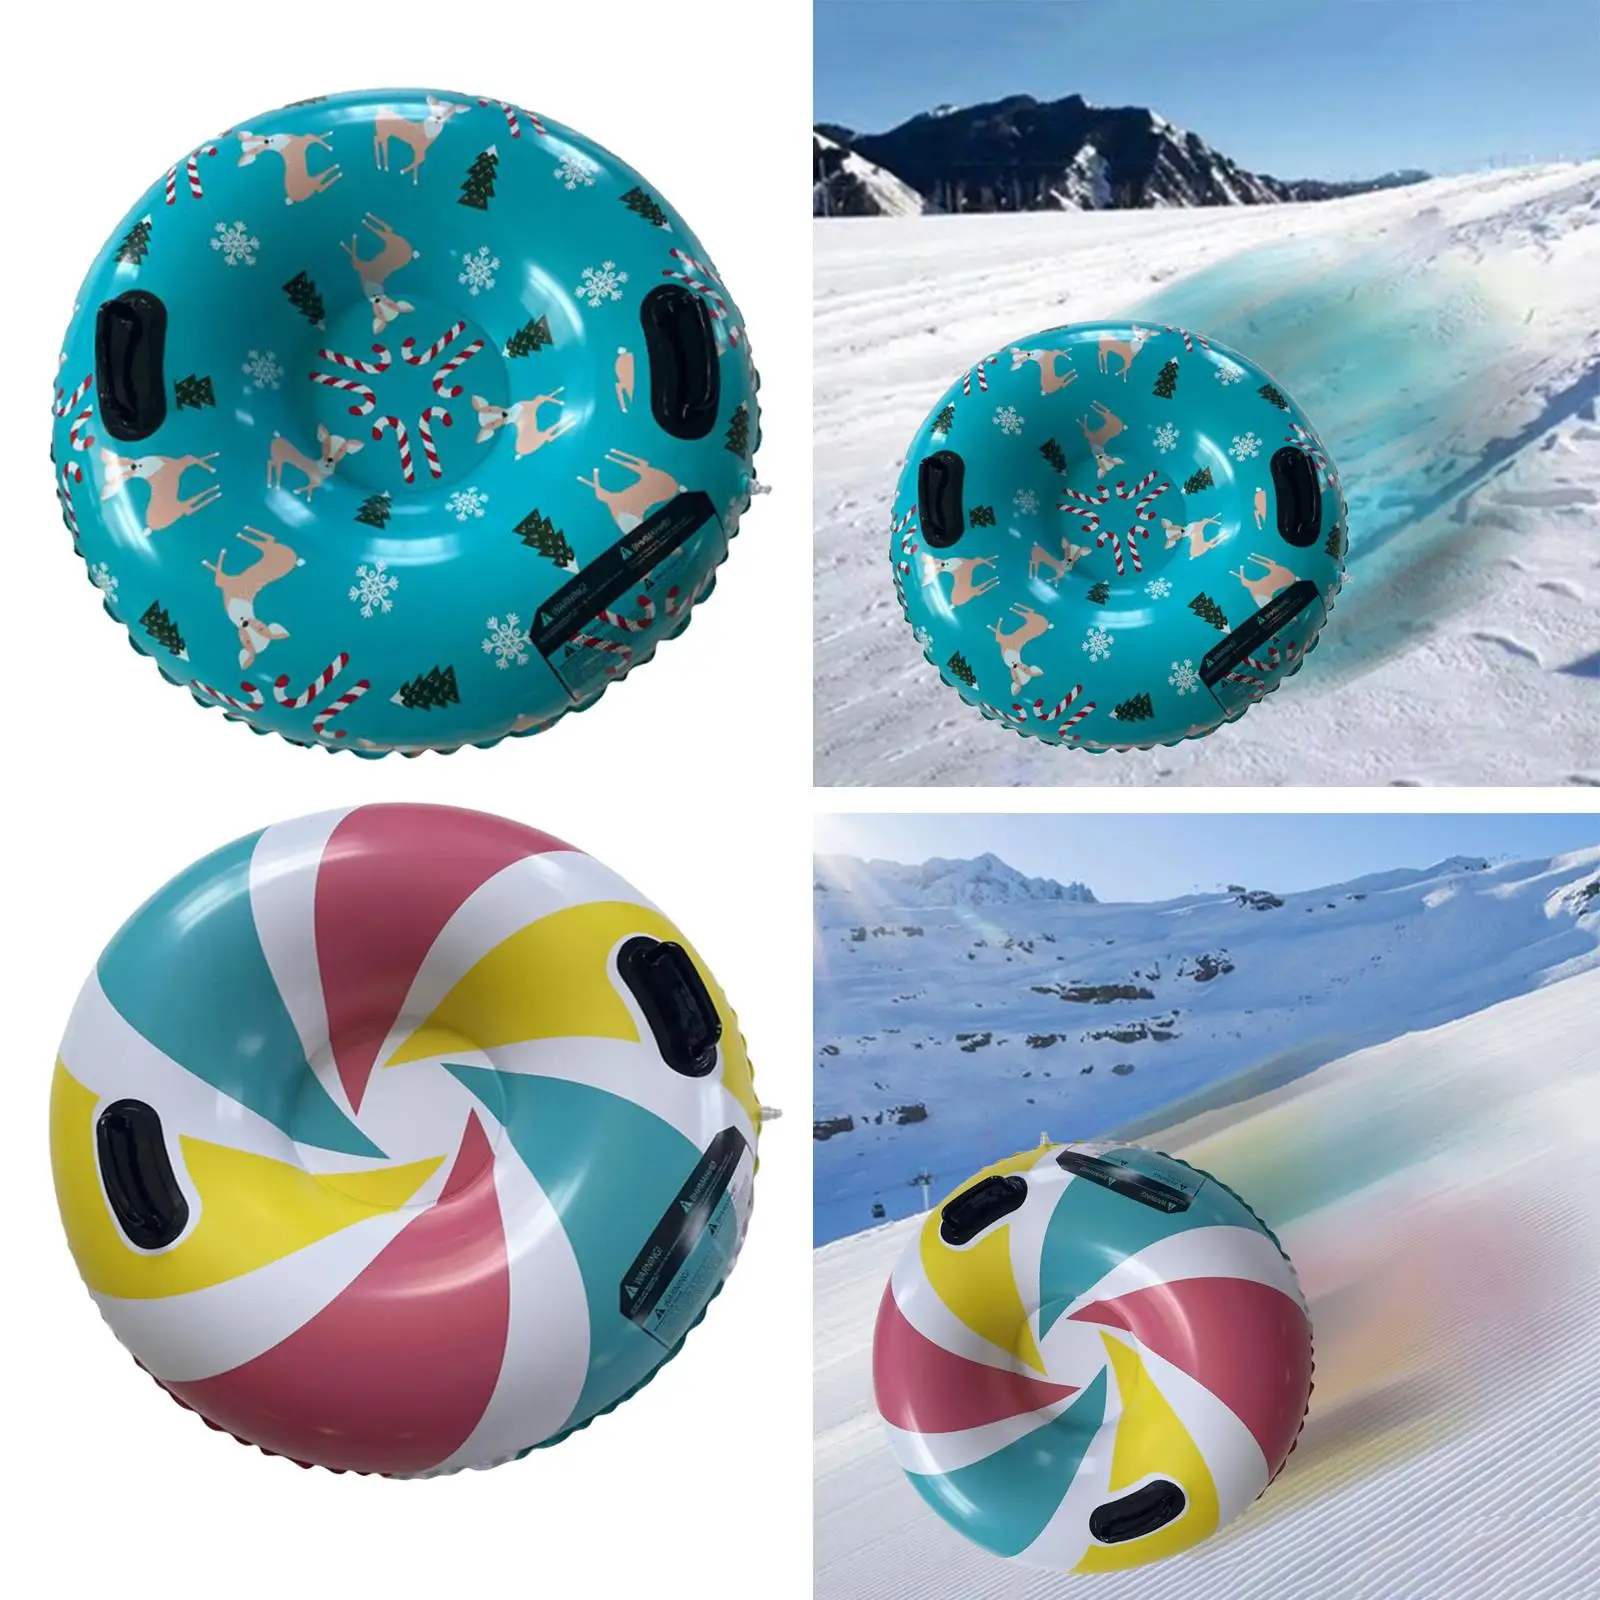 Winter Snow Tube Snow Toys Sleigh 35.83inch with Thickness Bottom Tube